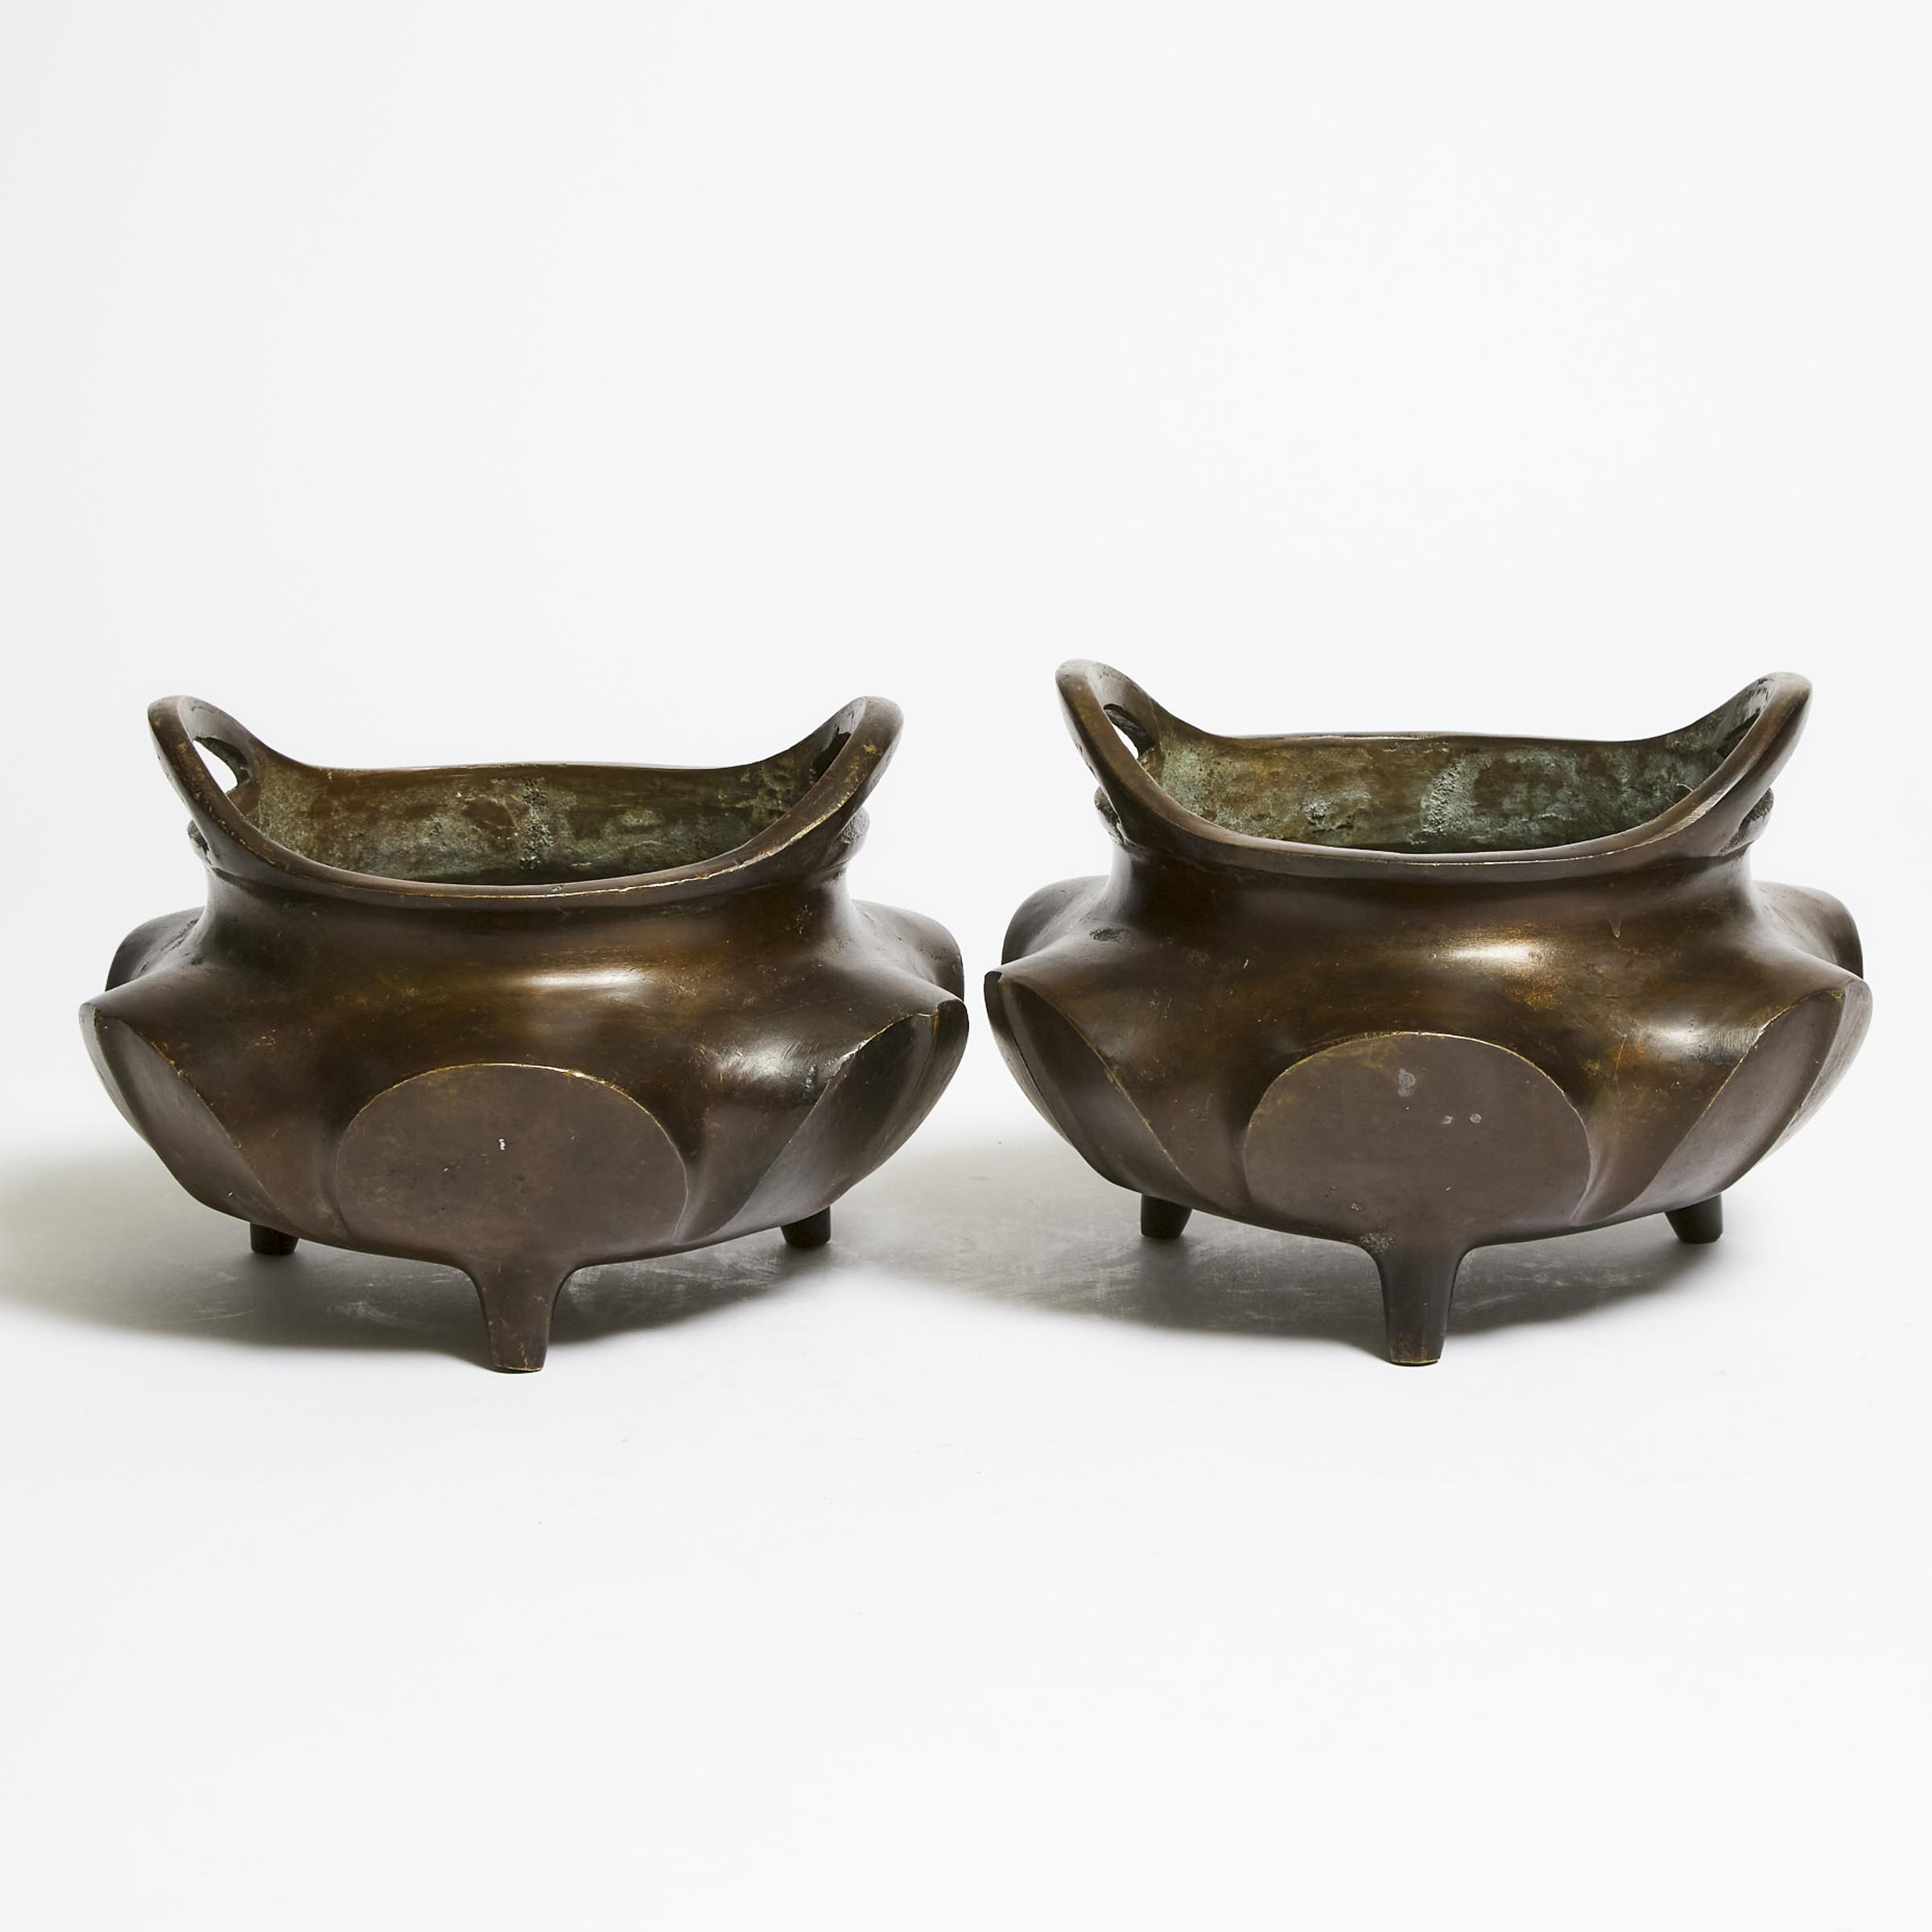 Two Bronze Censers, Mid 20th Century